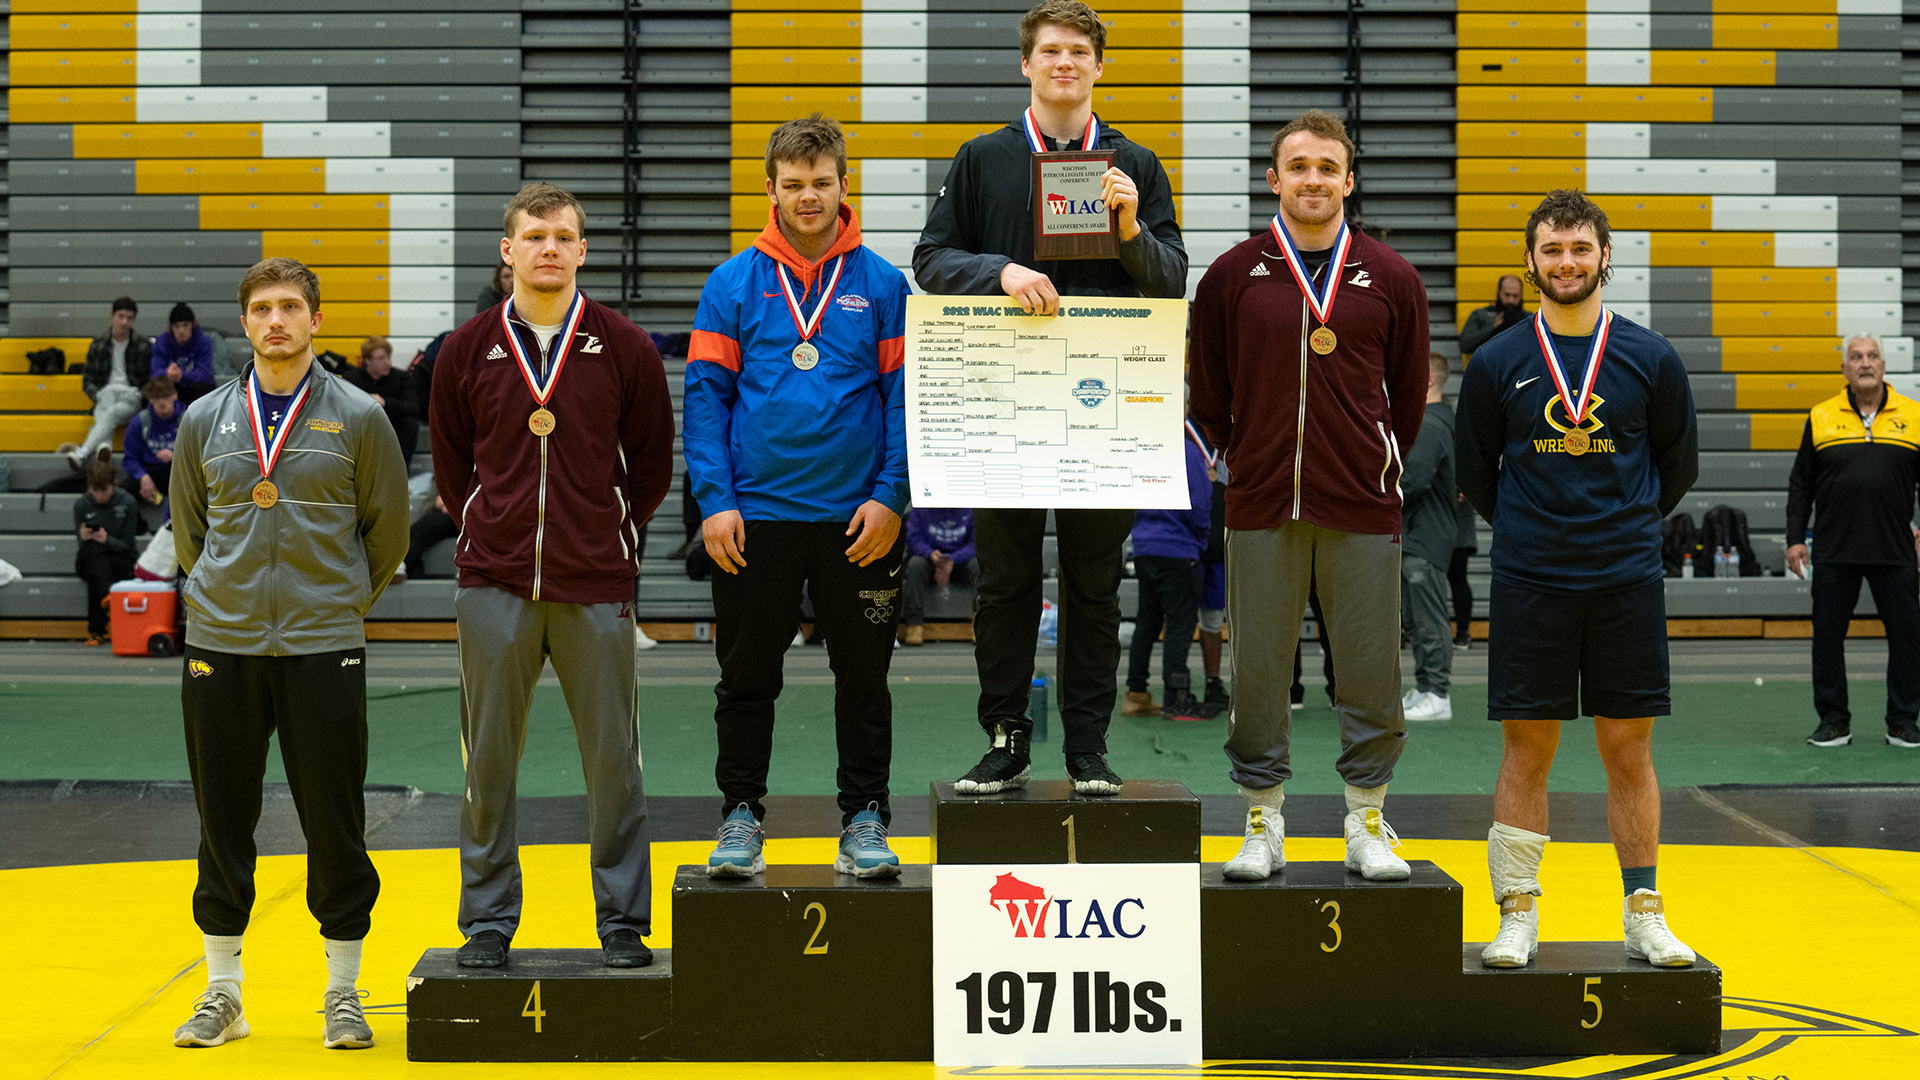 Beau Yineman, a two-time WIAC champion, will enter this year's NCAA postseason with a record of 28-2 (13 pins).